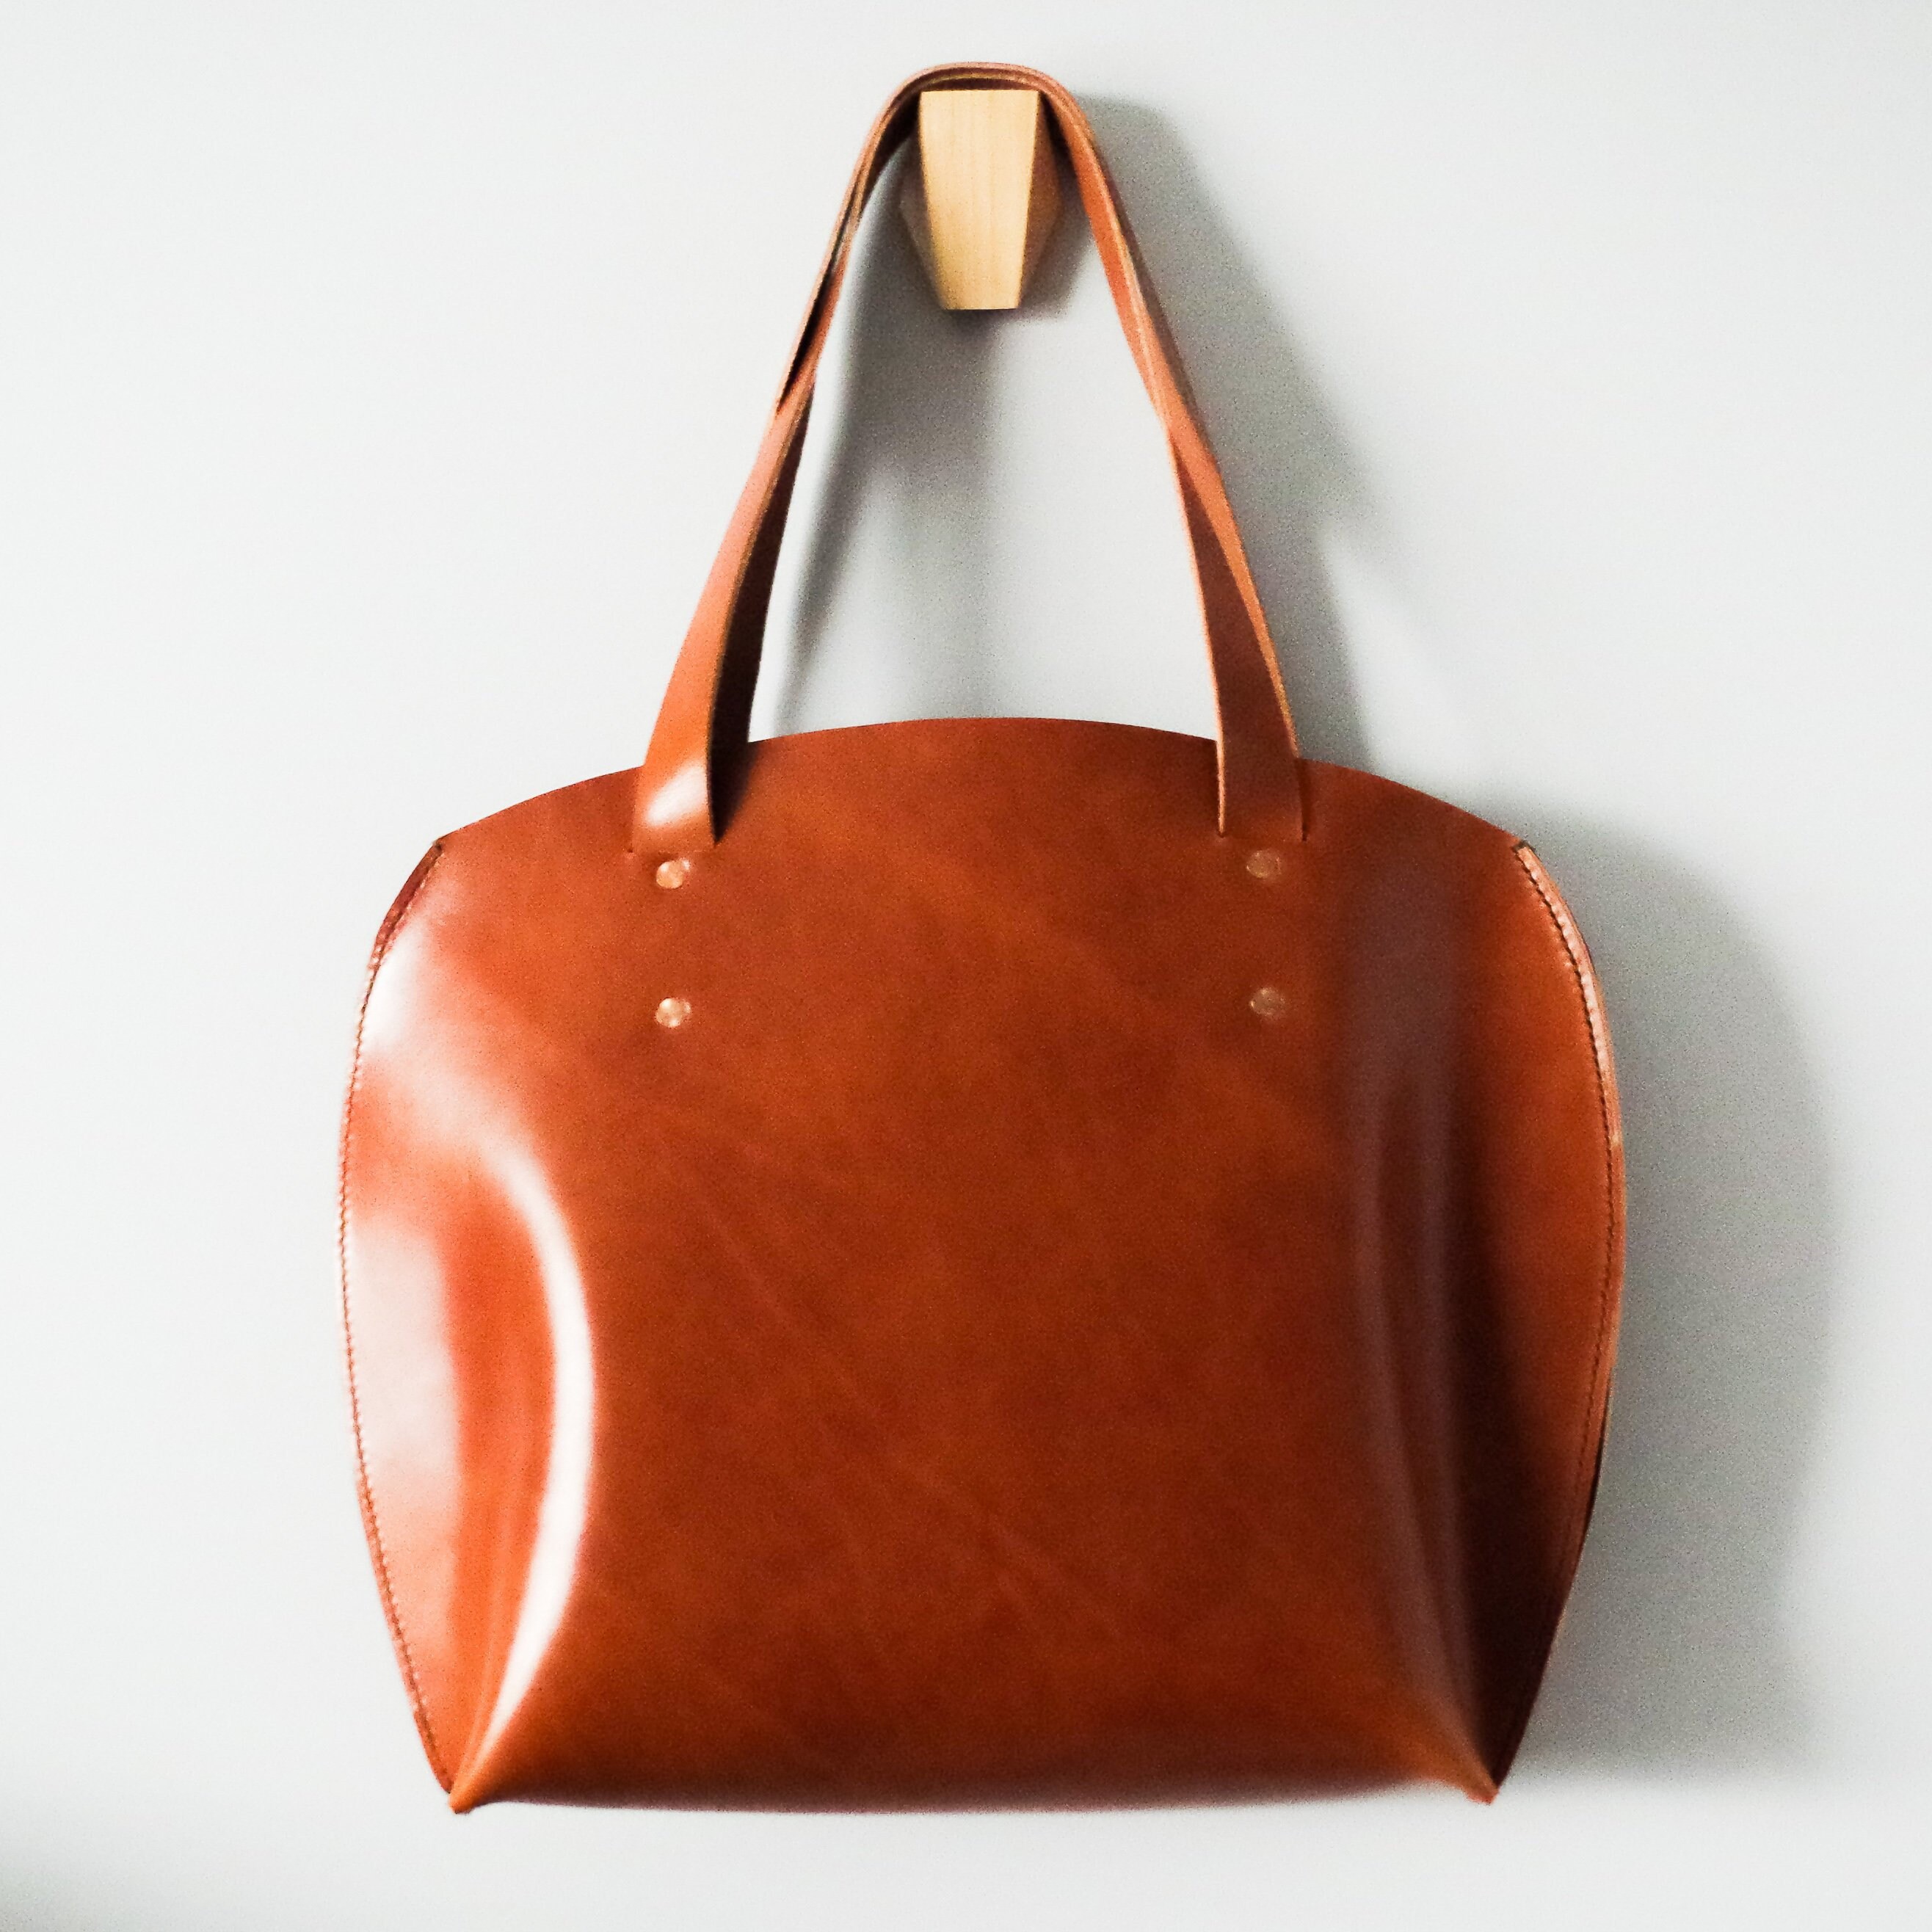 Large Signature Bag in Brown Leather Tote Vegetable - Etsy